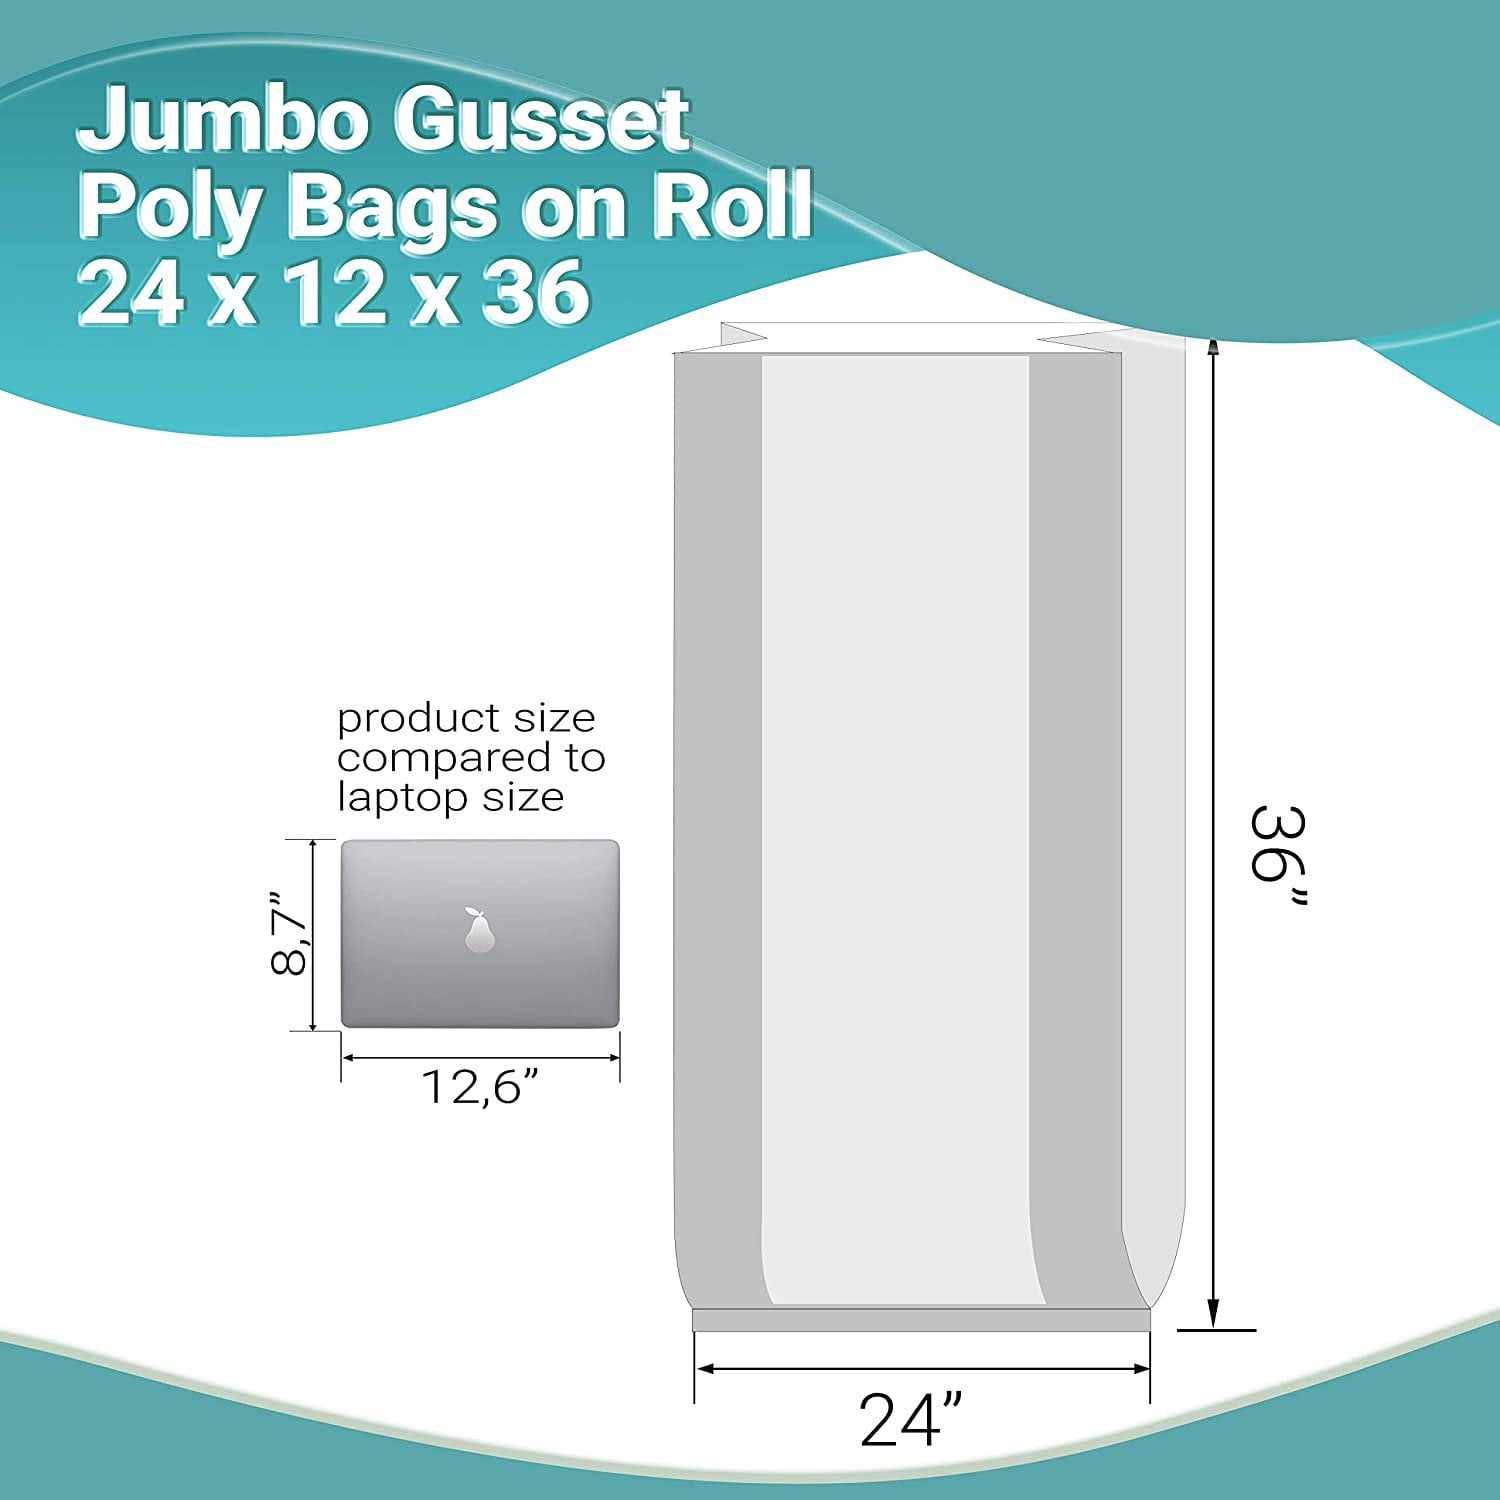 APQ Pack of 500 Jumbo Gusset Poly Bags on Roll 14 x 13.5 x 27. Large  Perforated Clear Bags 14 x 13 1/2 x 27. Thickness 1.5 Mil. Expandable  Plastic